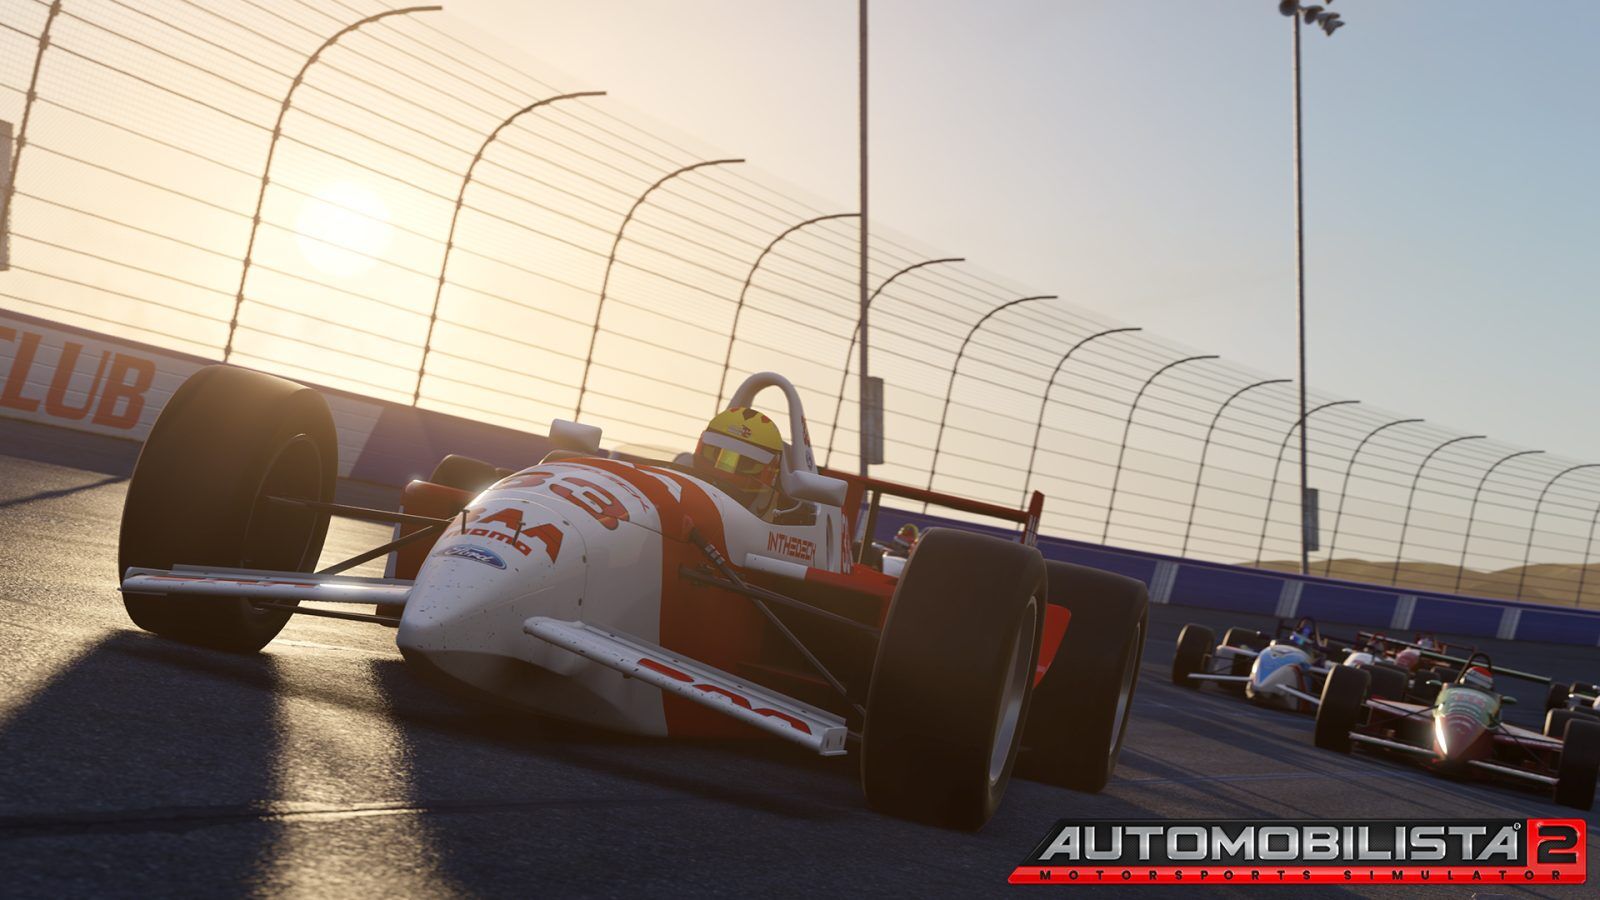 The latest update for Automobilista 2 means you should give it another chance